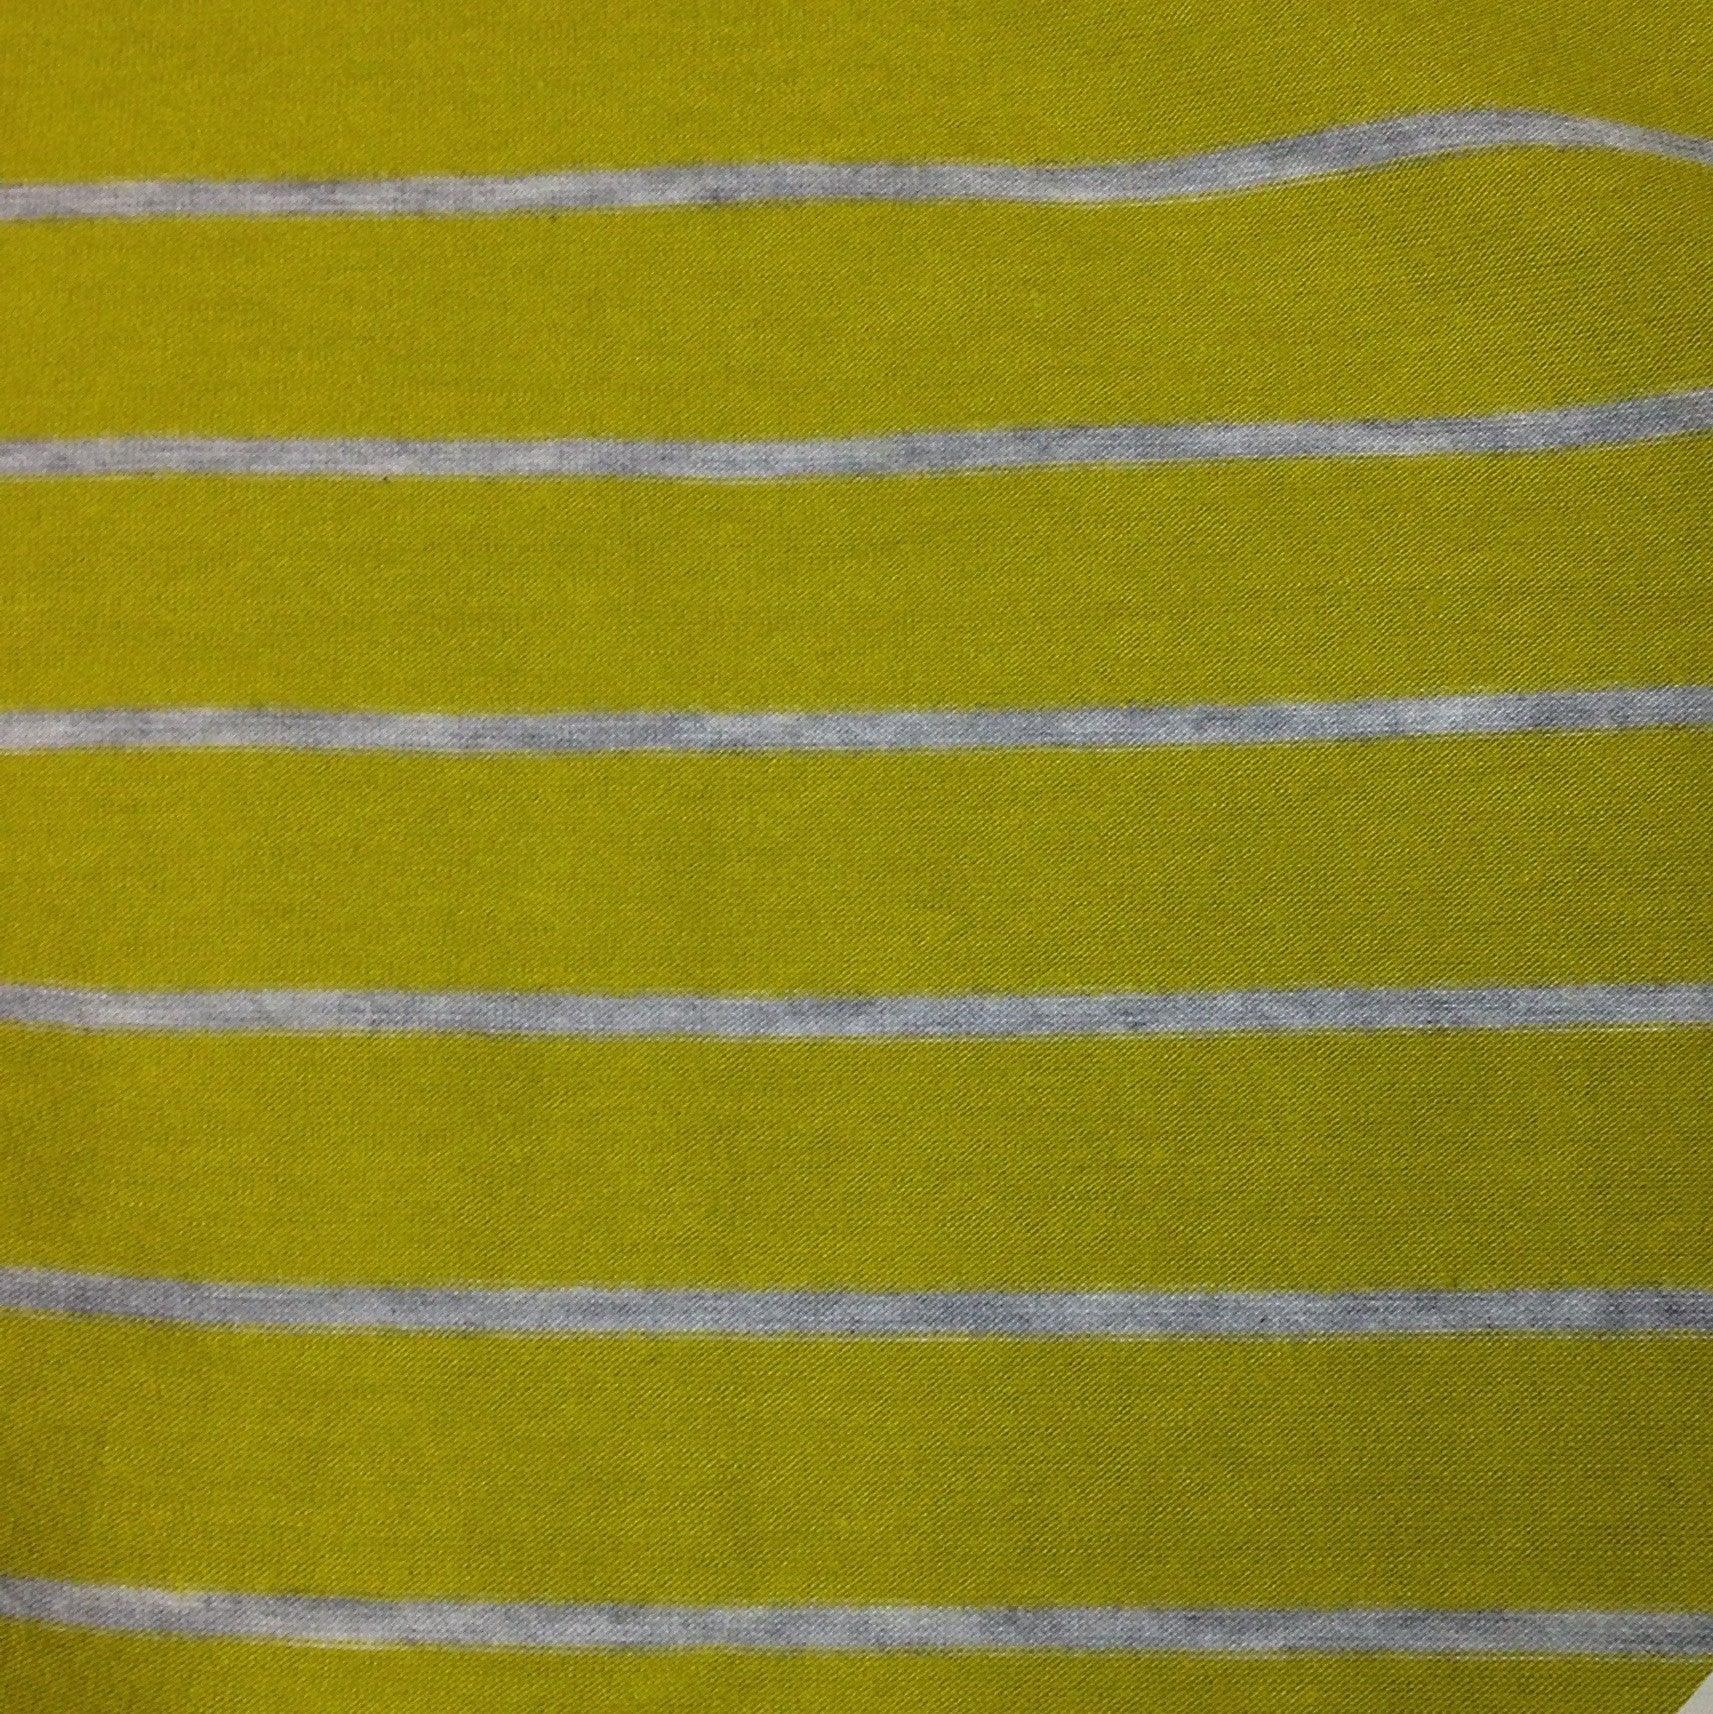 Pear and Light Gray Stripes on Bamboo/Spandex Jersey 